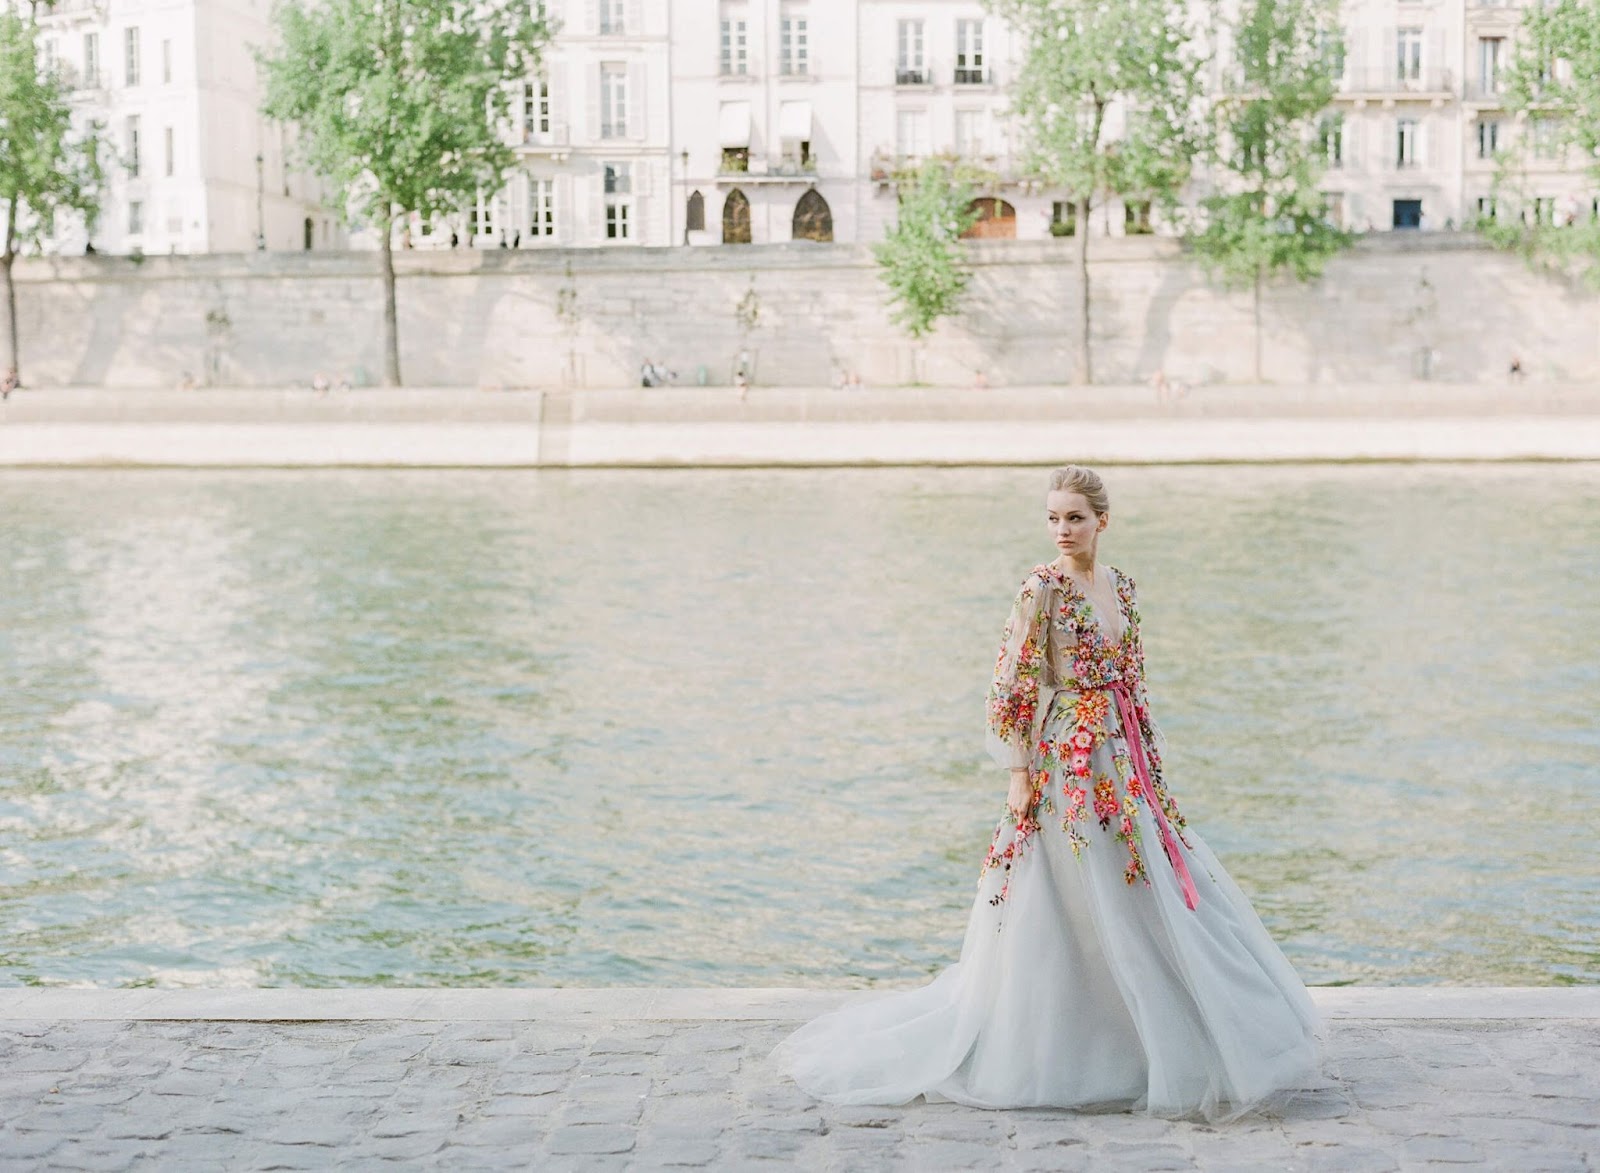 Marchesa floral gown modeled by the Seine River